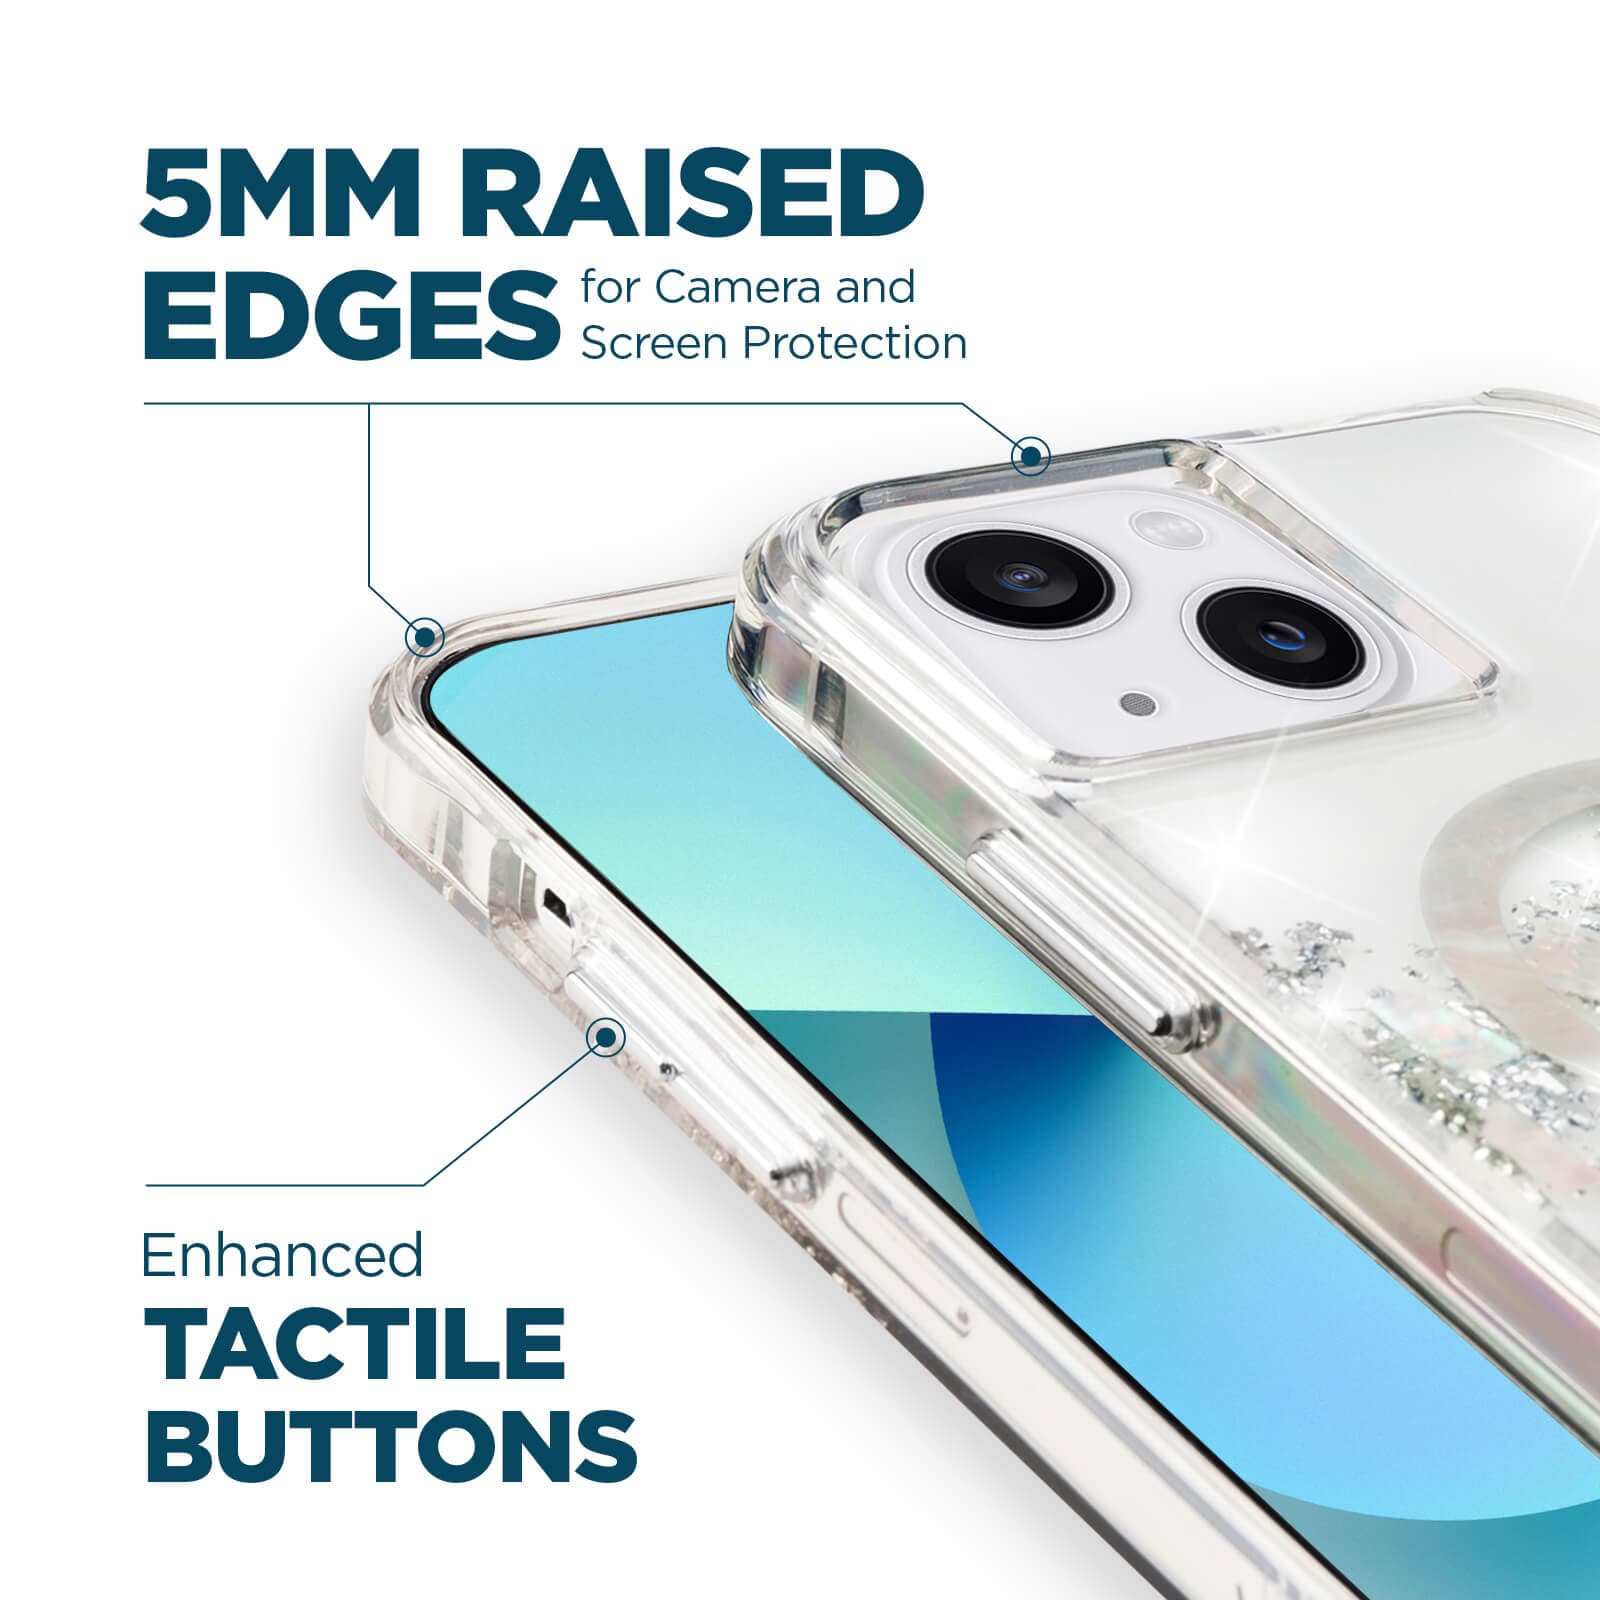 5mm raised edges for camera and screen protection. Enhanced tactile buttons. color::Pearl